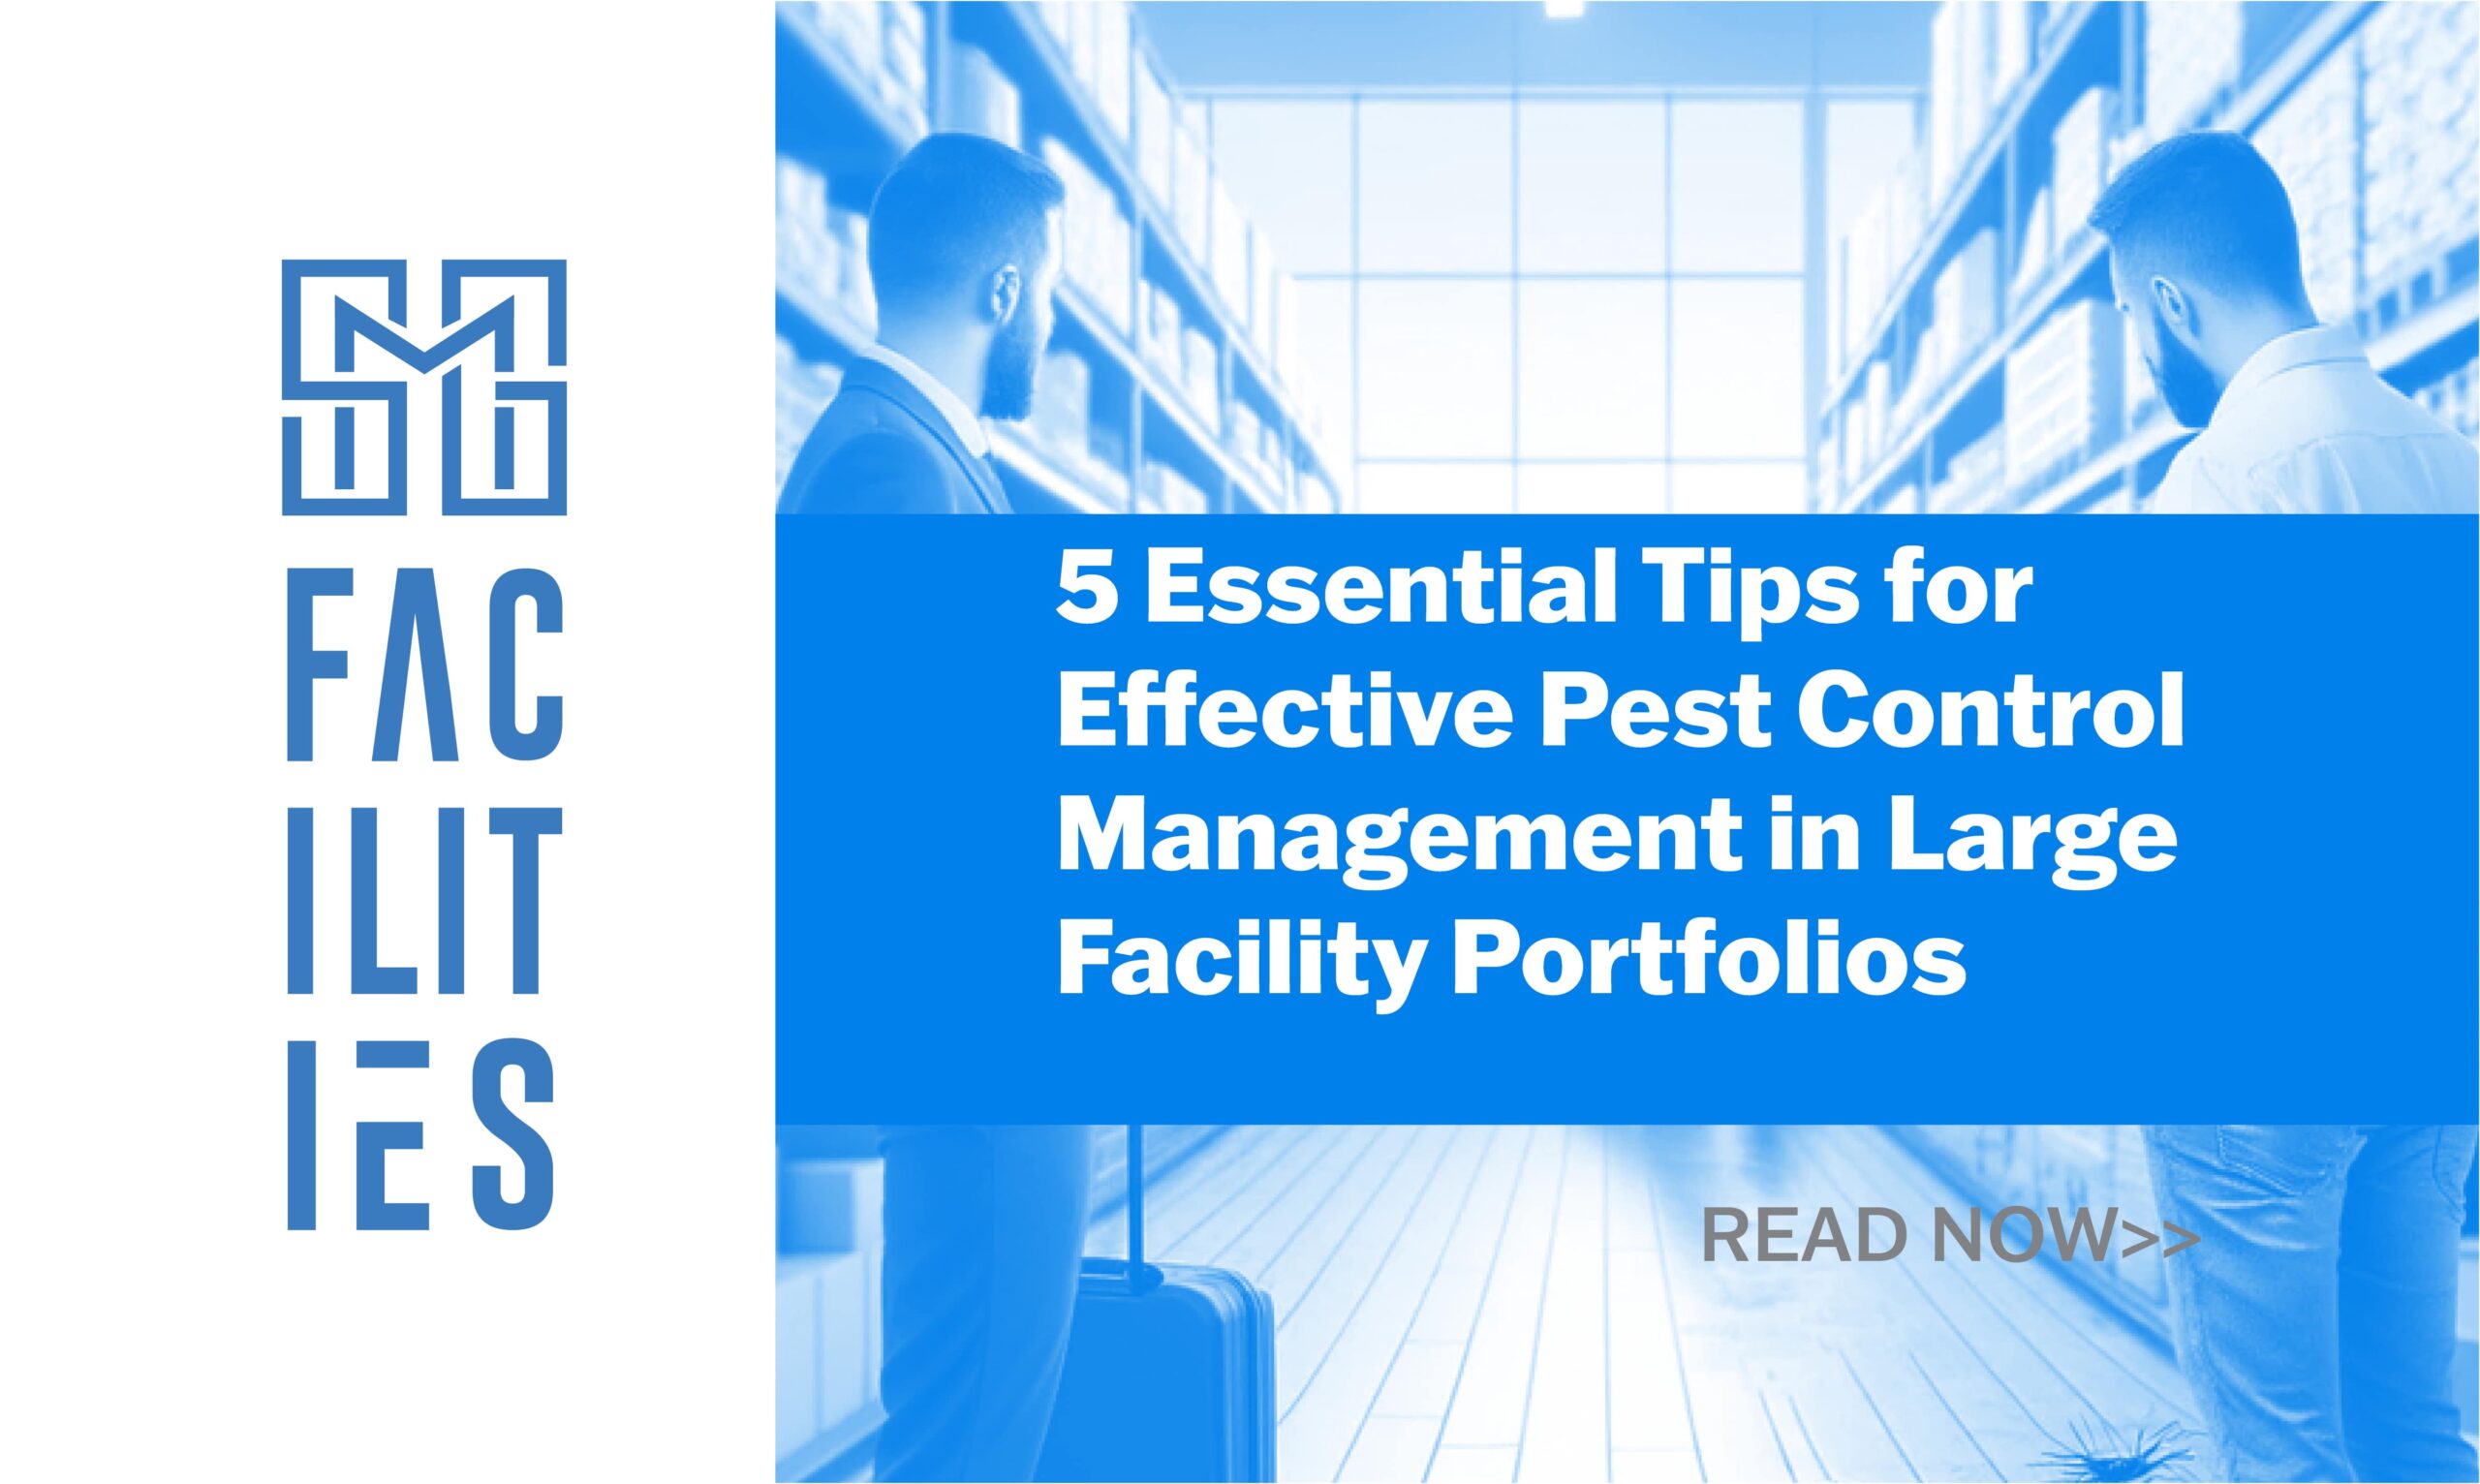 Pest control in large facilities